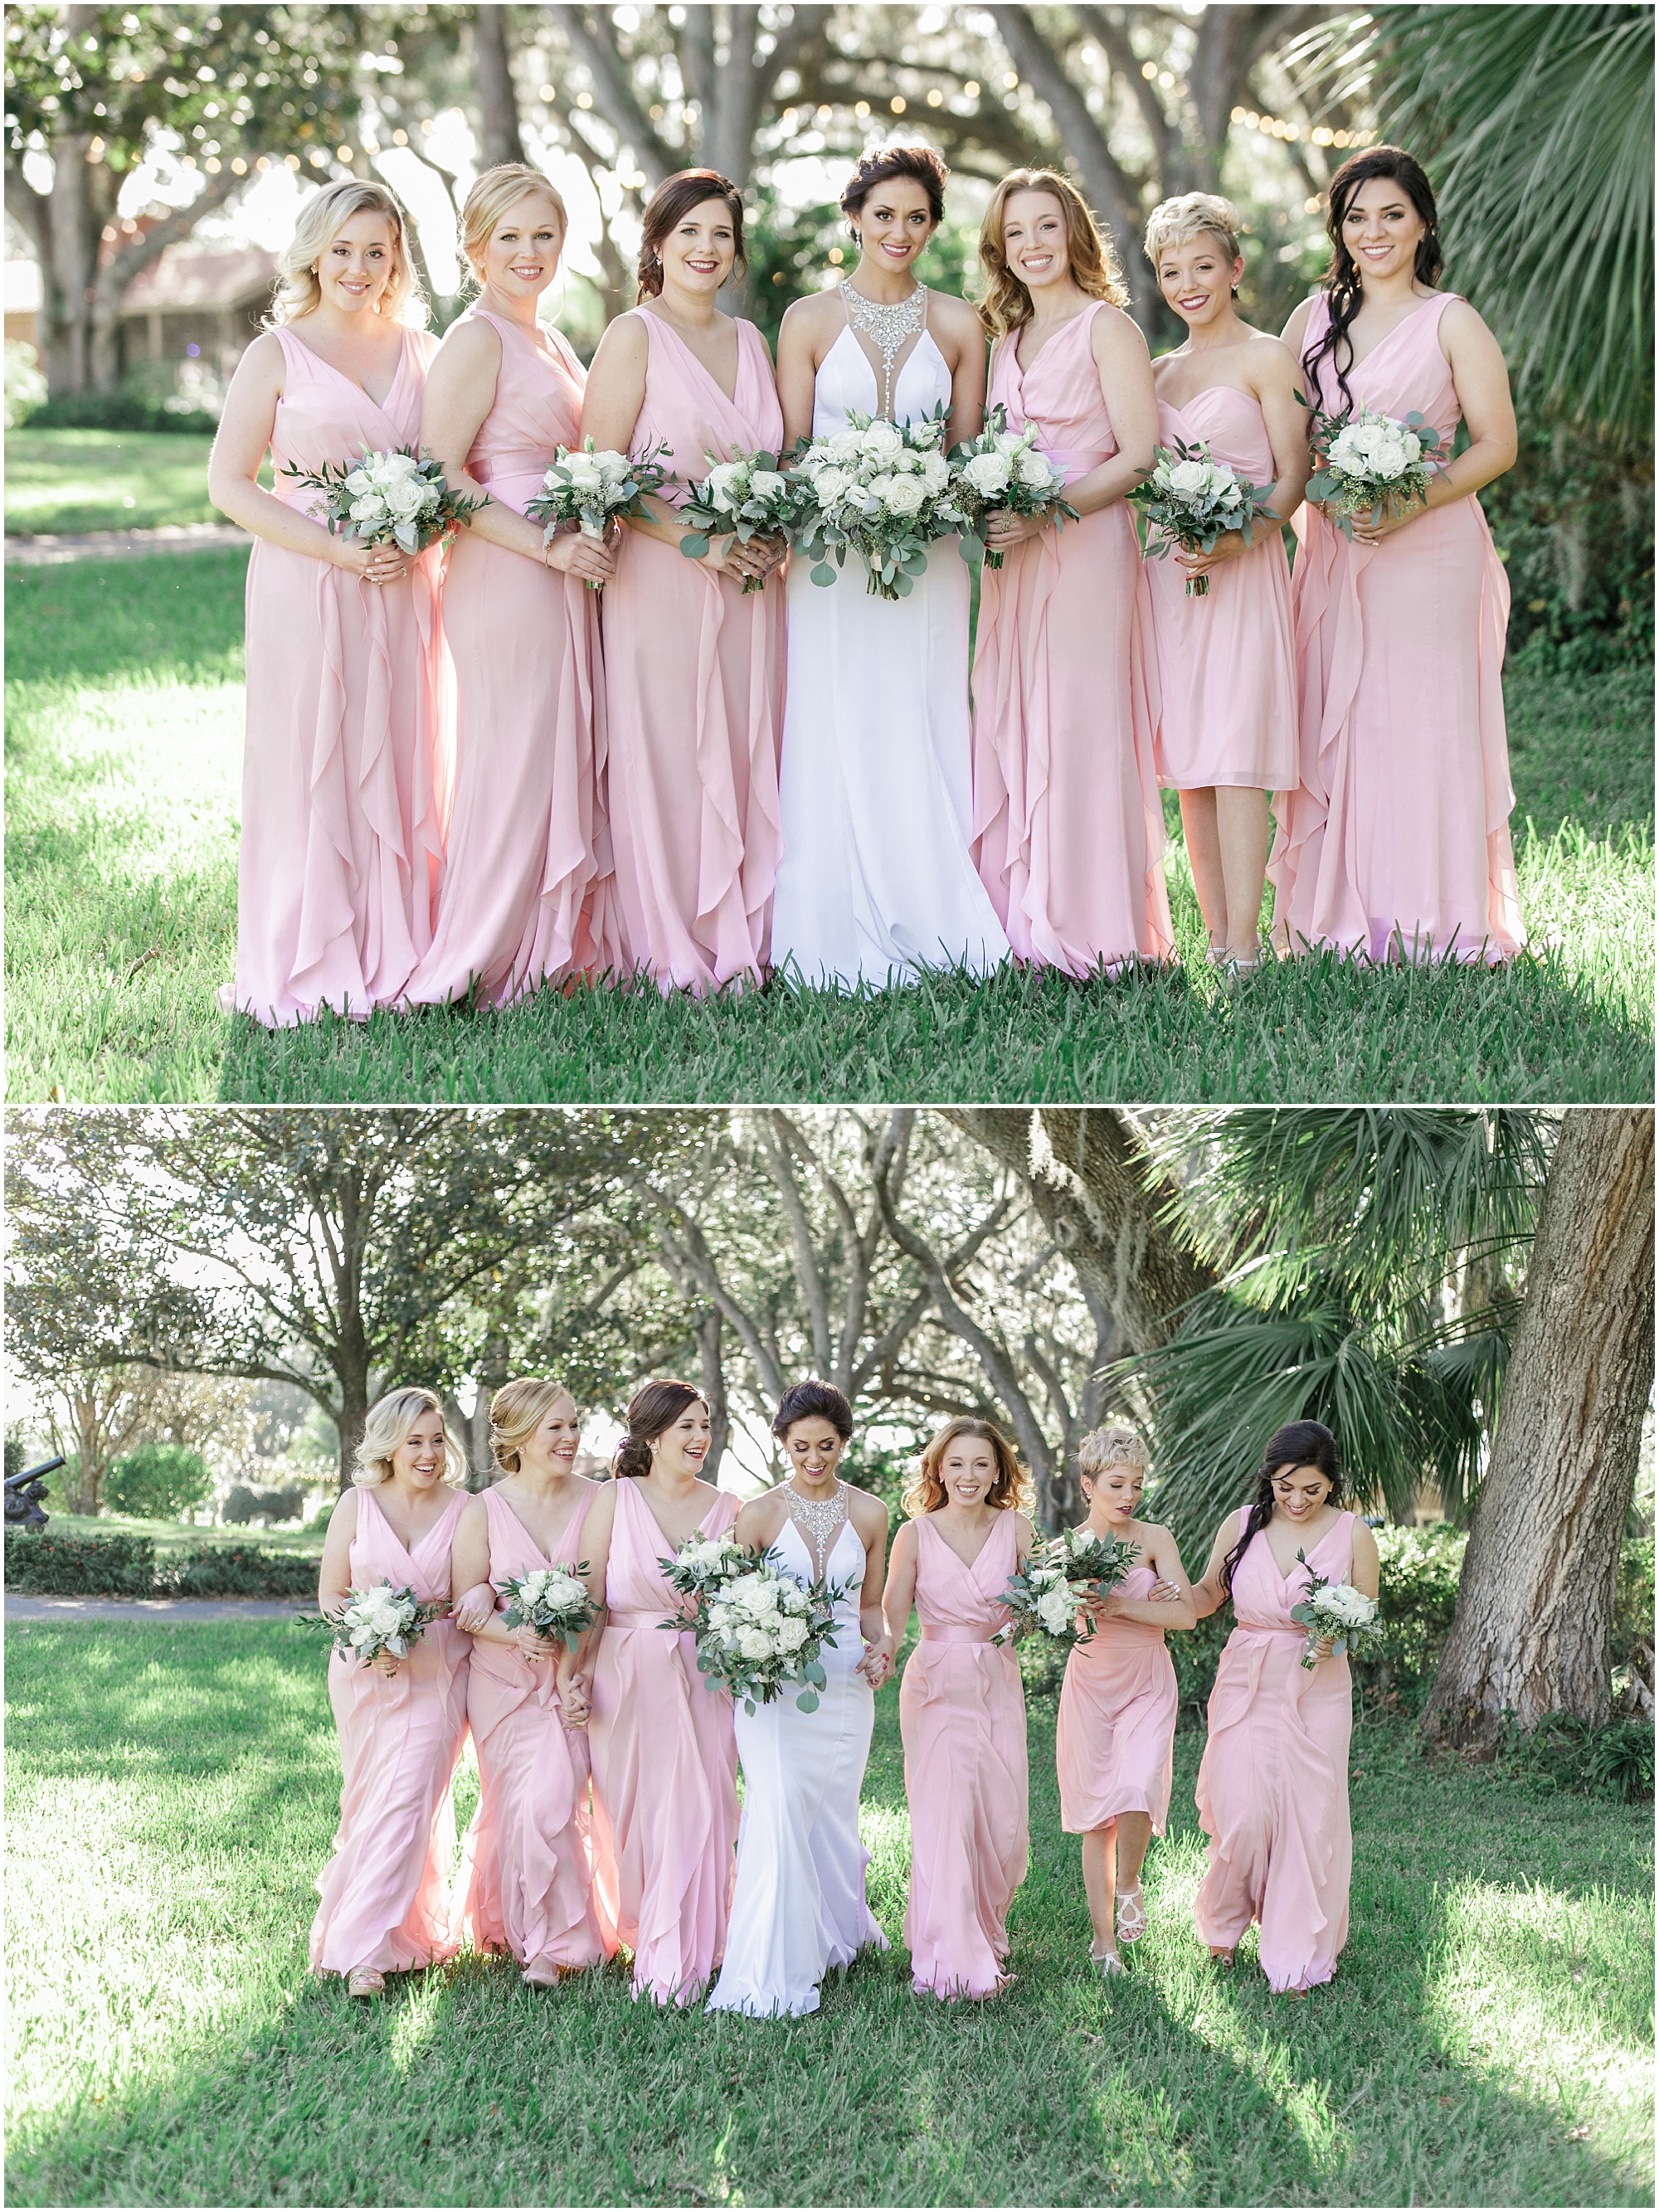 Southern Elegance bride with her bridesmaids.